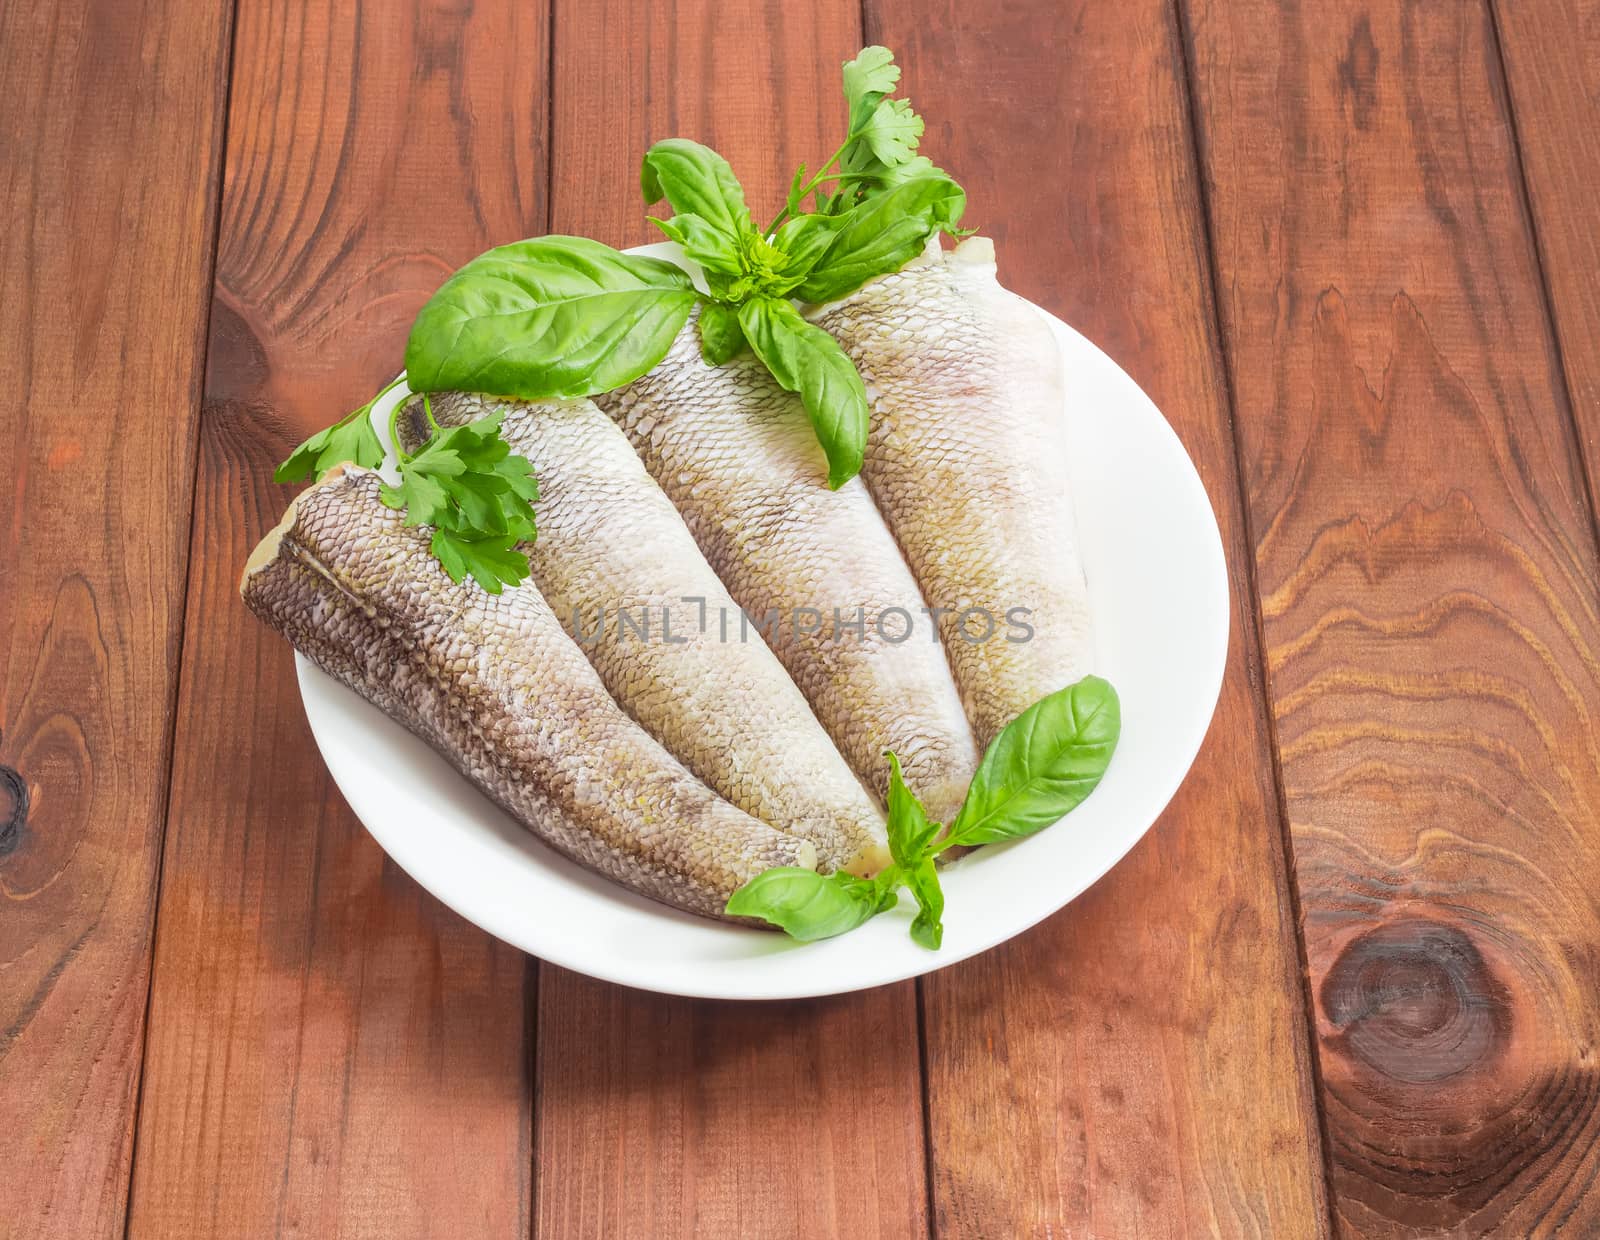 Uncooked carcasses of the notothenia fish without of a heads and tails and with peeled scales and prepared for cooking, twigs of basil and parsley on the white dish on a dark wooden surface
